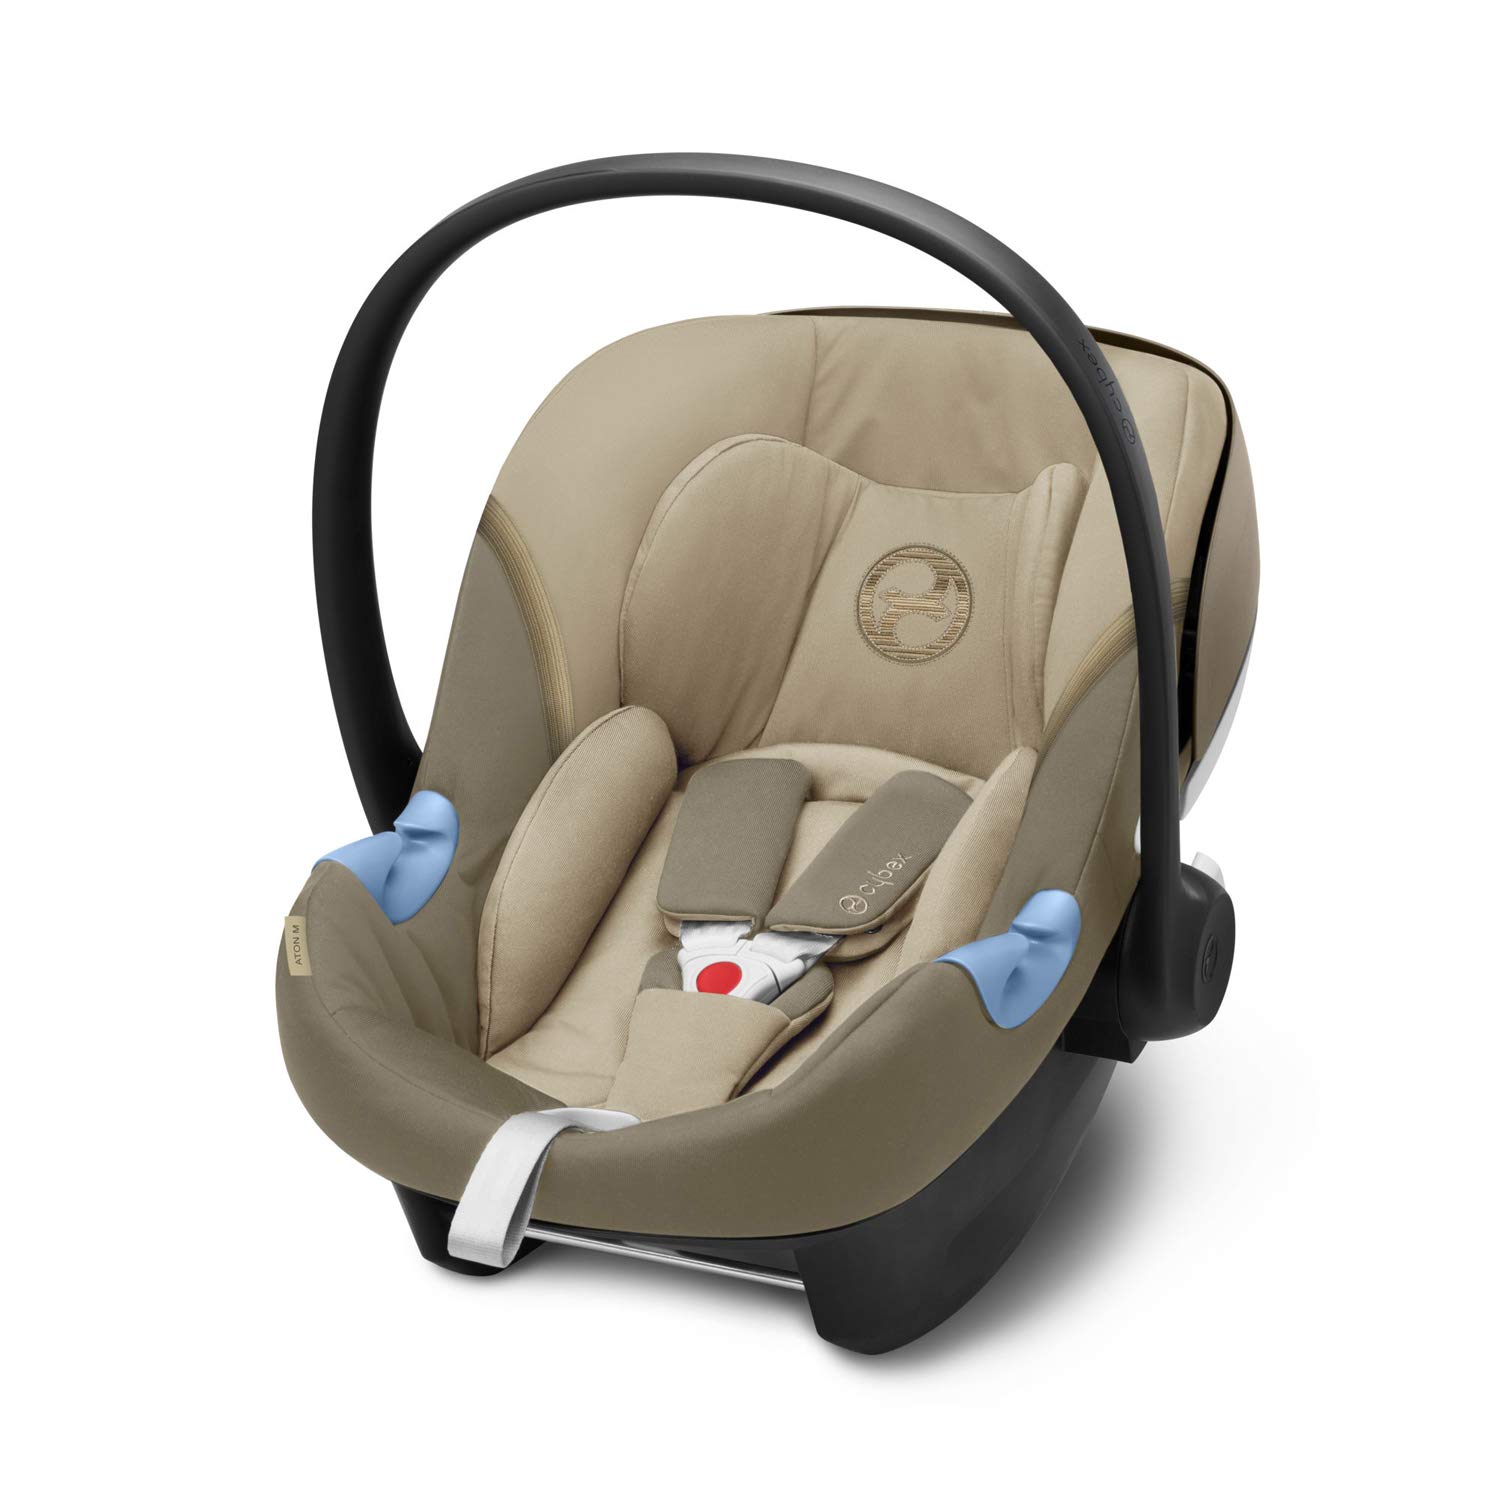 CYBEX Gold Aton M i-Size Car Seat with Newborn Insert. For Children from 45 cm to 87 cm. Max. 13 kg. Classic Beige